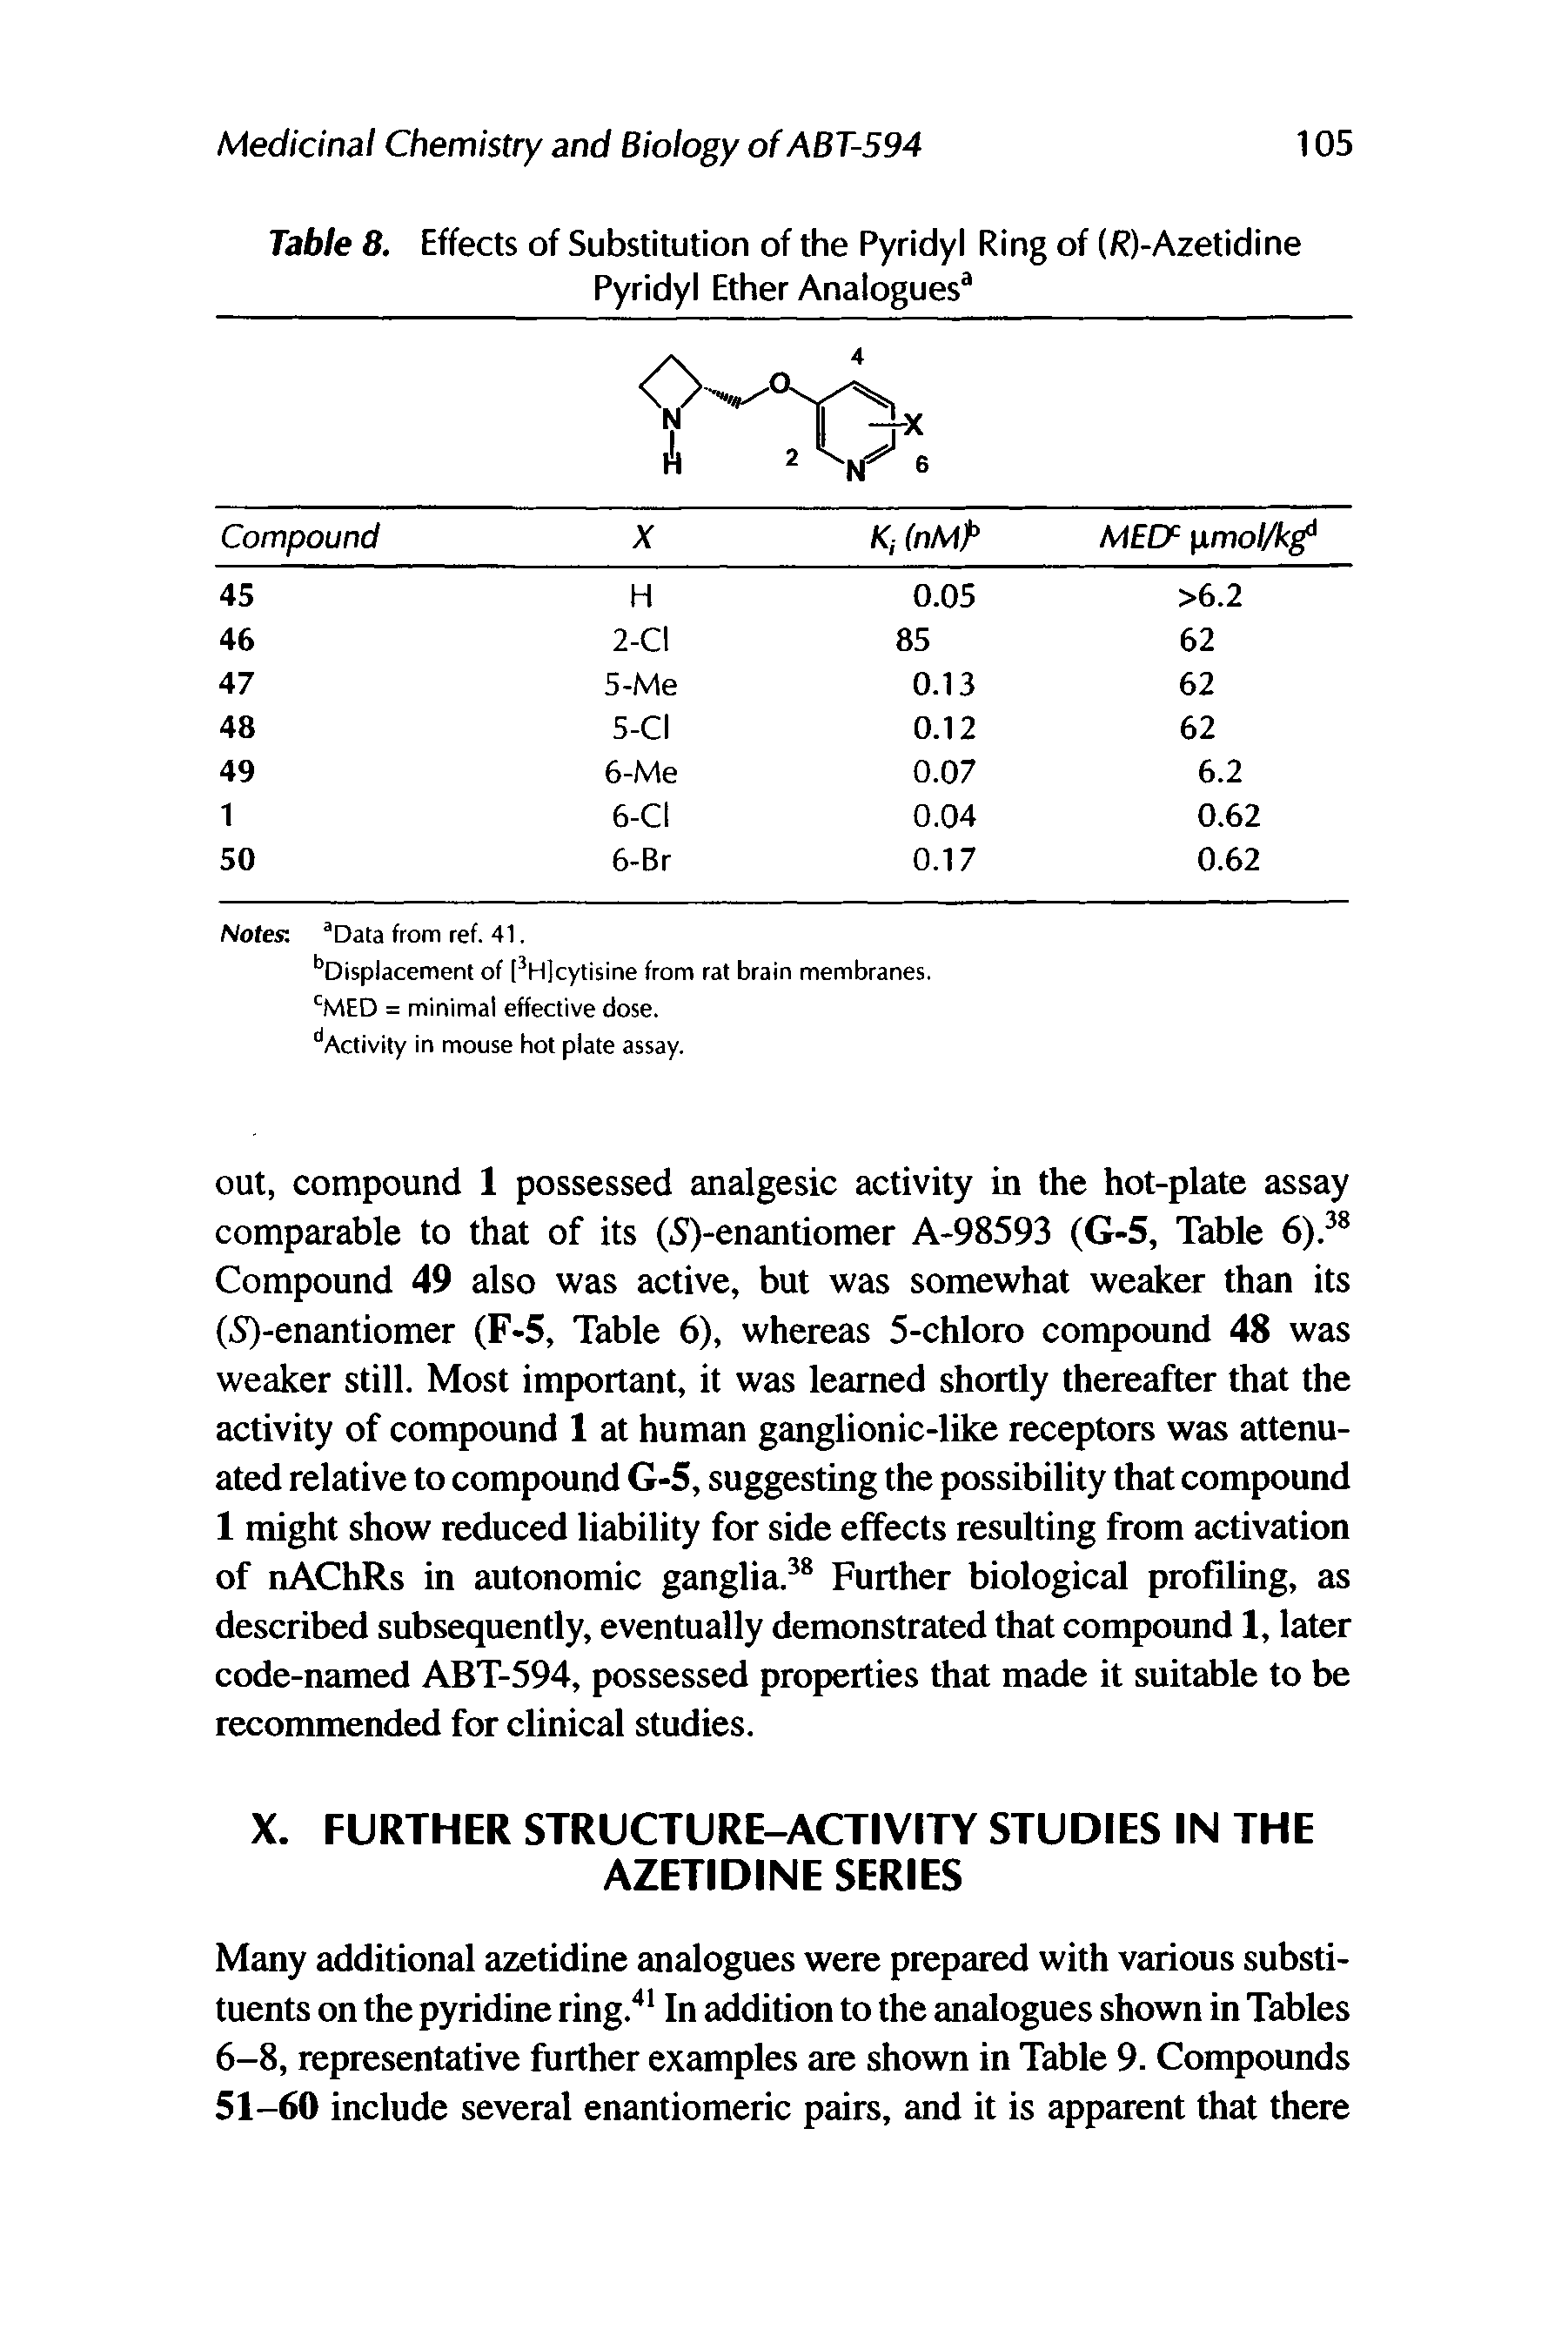 Table 8. Effects of Substitution of the Pyridyl Ring of (R)-Azetidine Pyridyl Ether Analogues3...